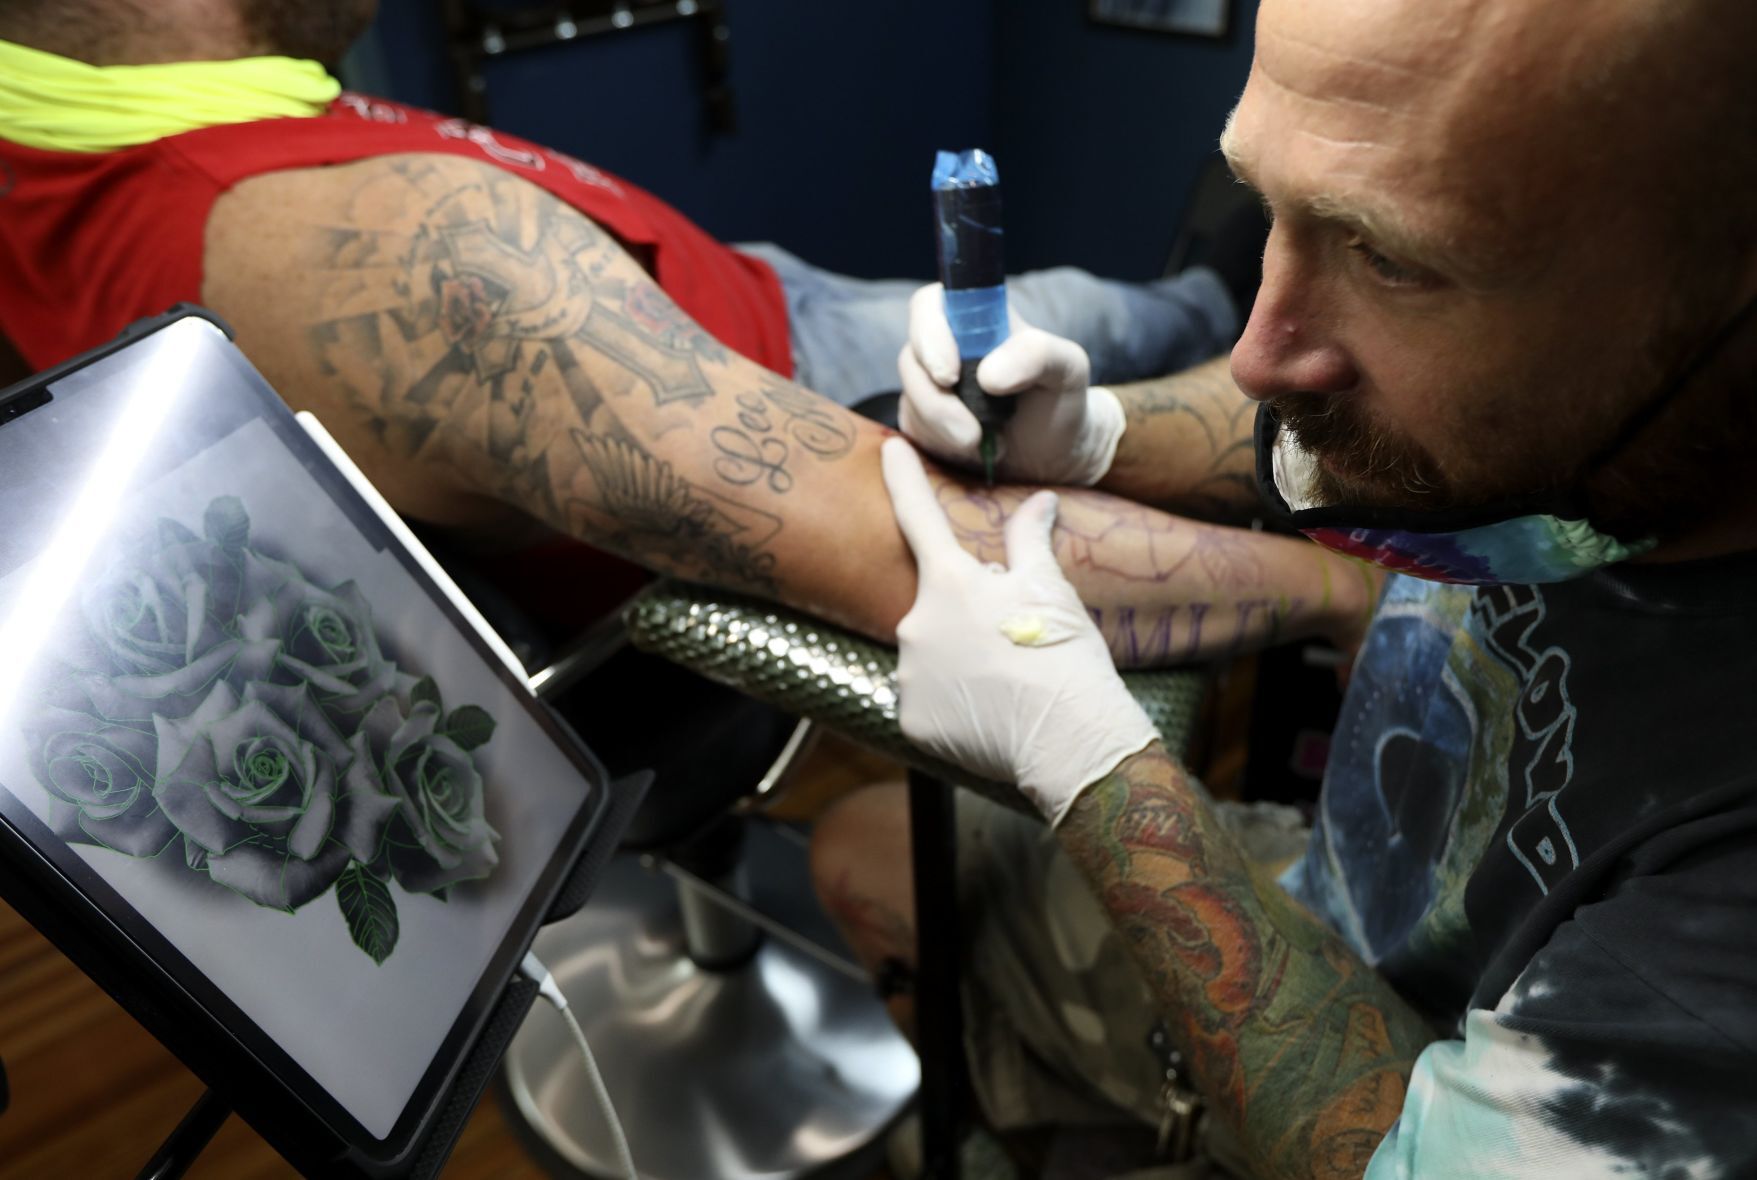 7 Ways To Make Tattooing EnvironmentHealthy